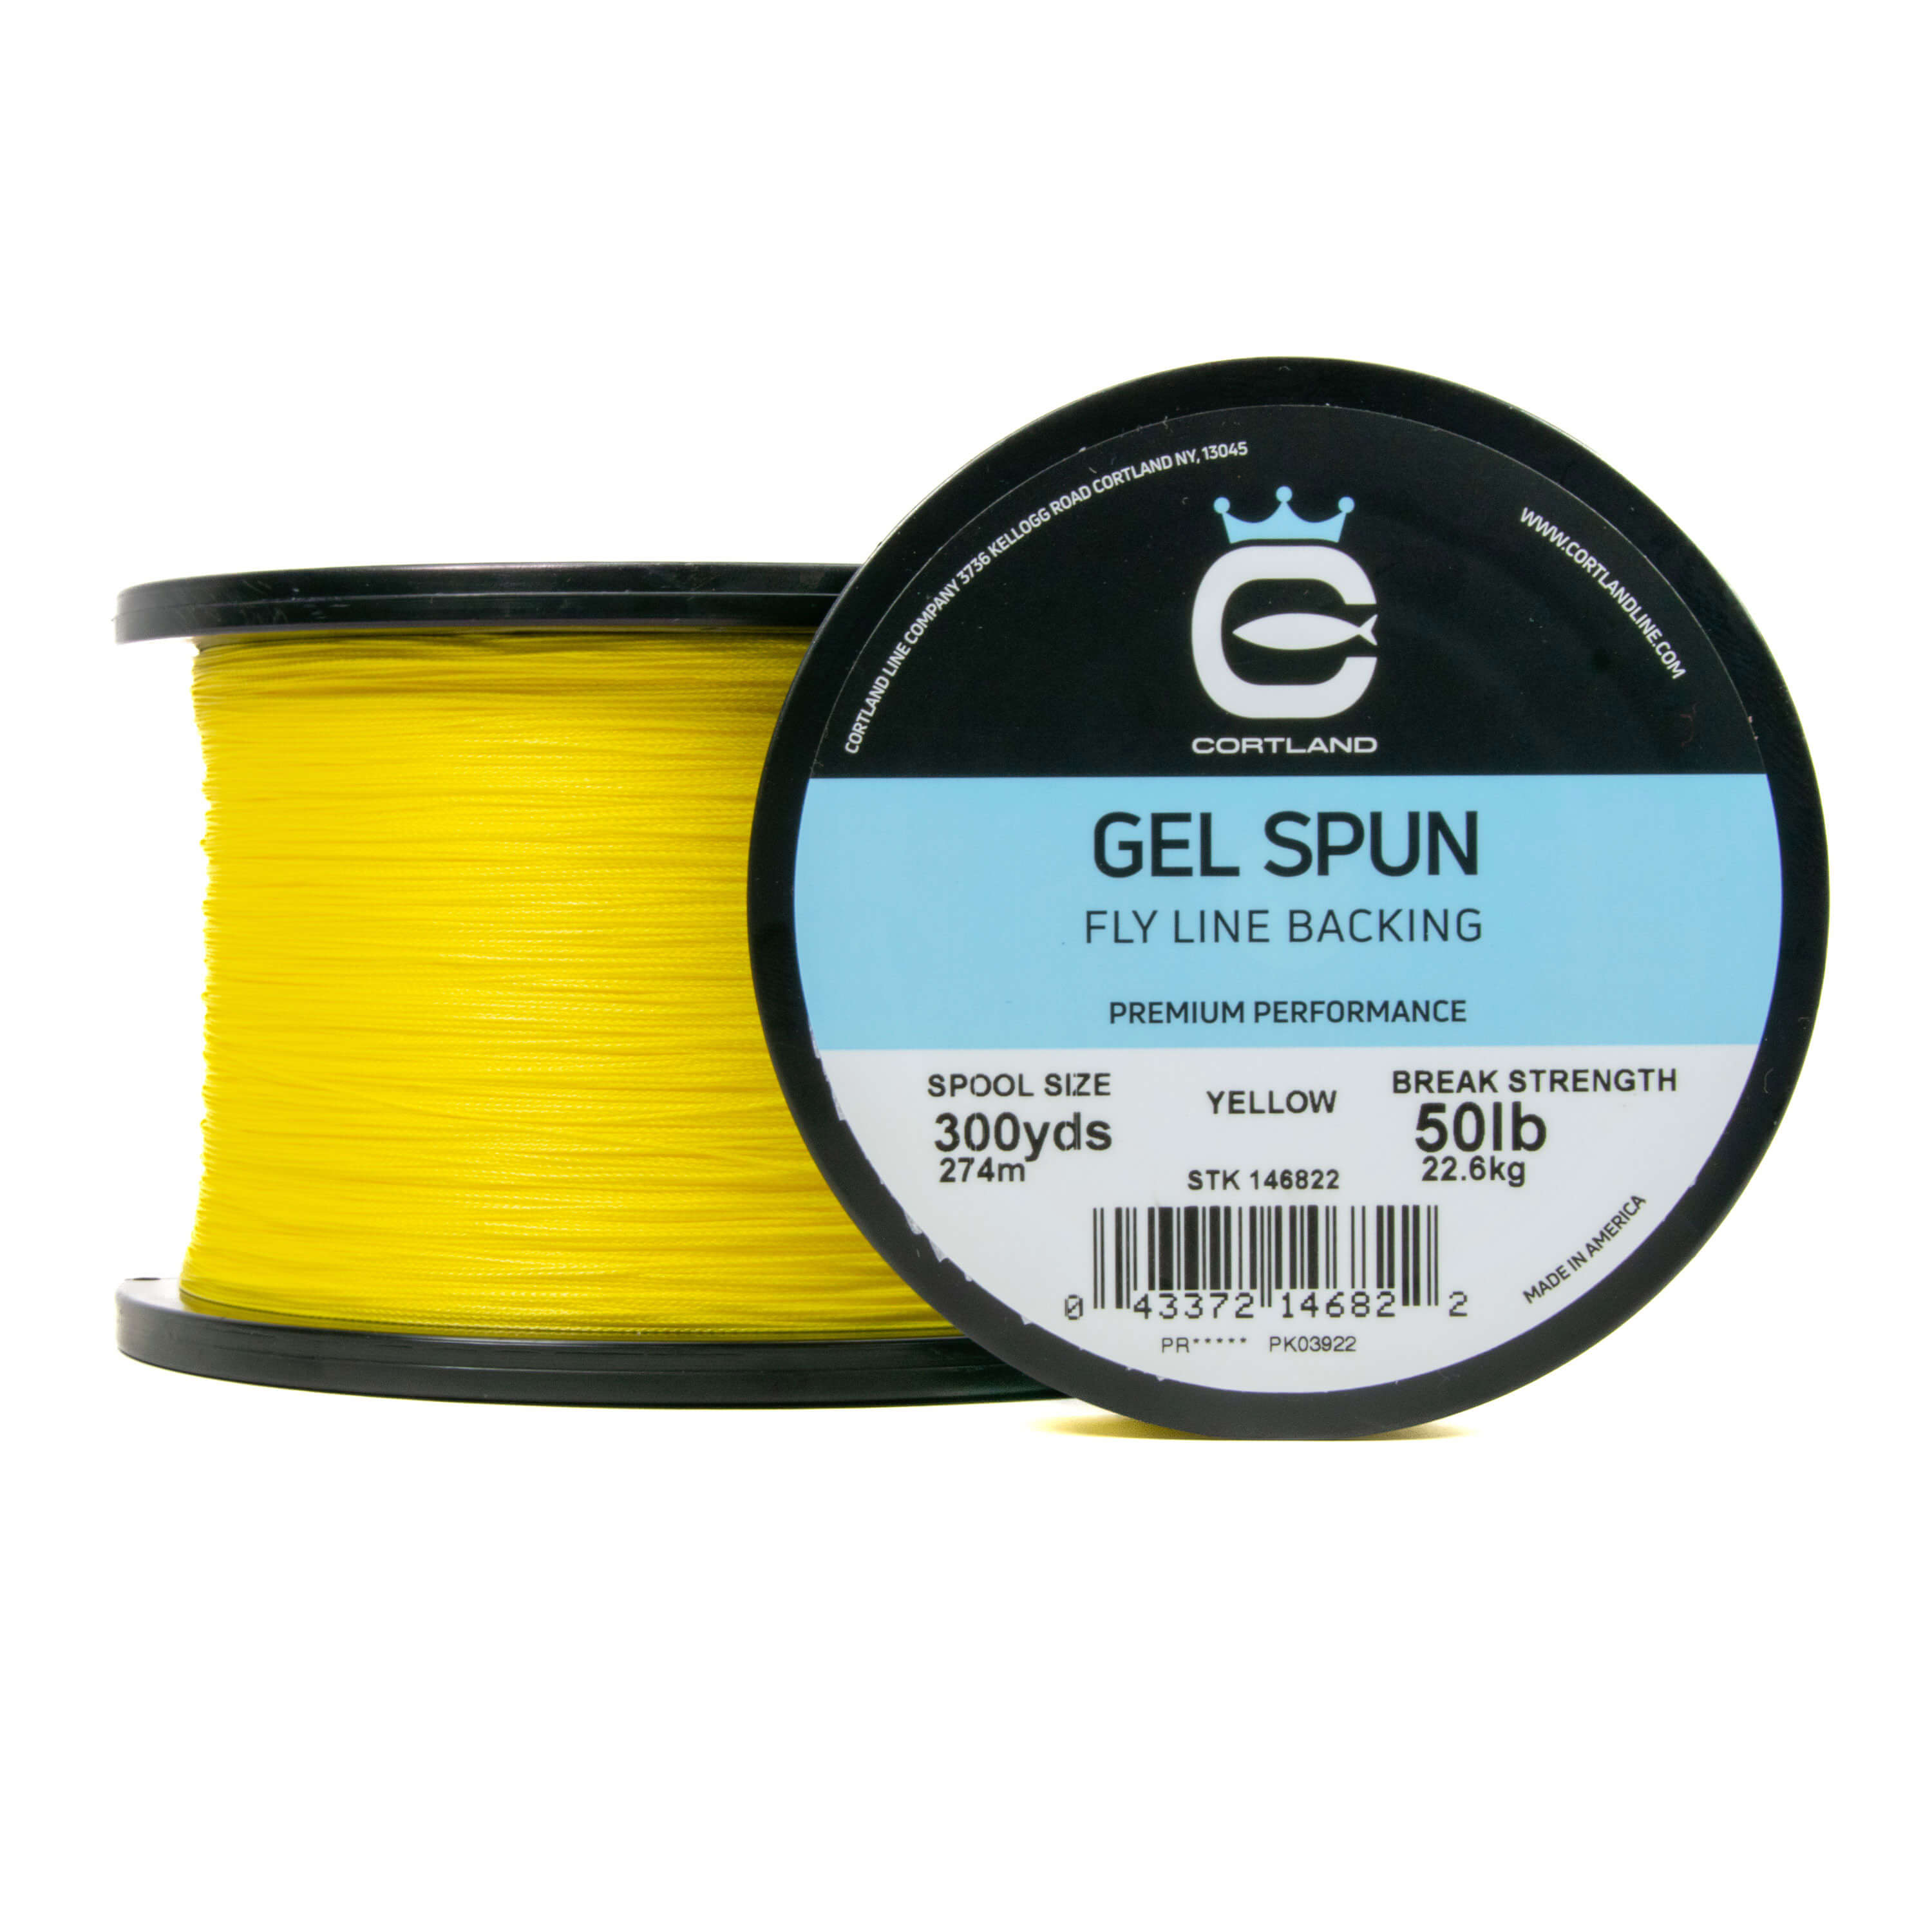 Sewline Lead Refill Yellow – Wooden SpoolsQuilting, Knitting and More!